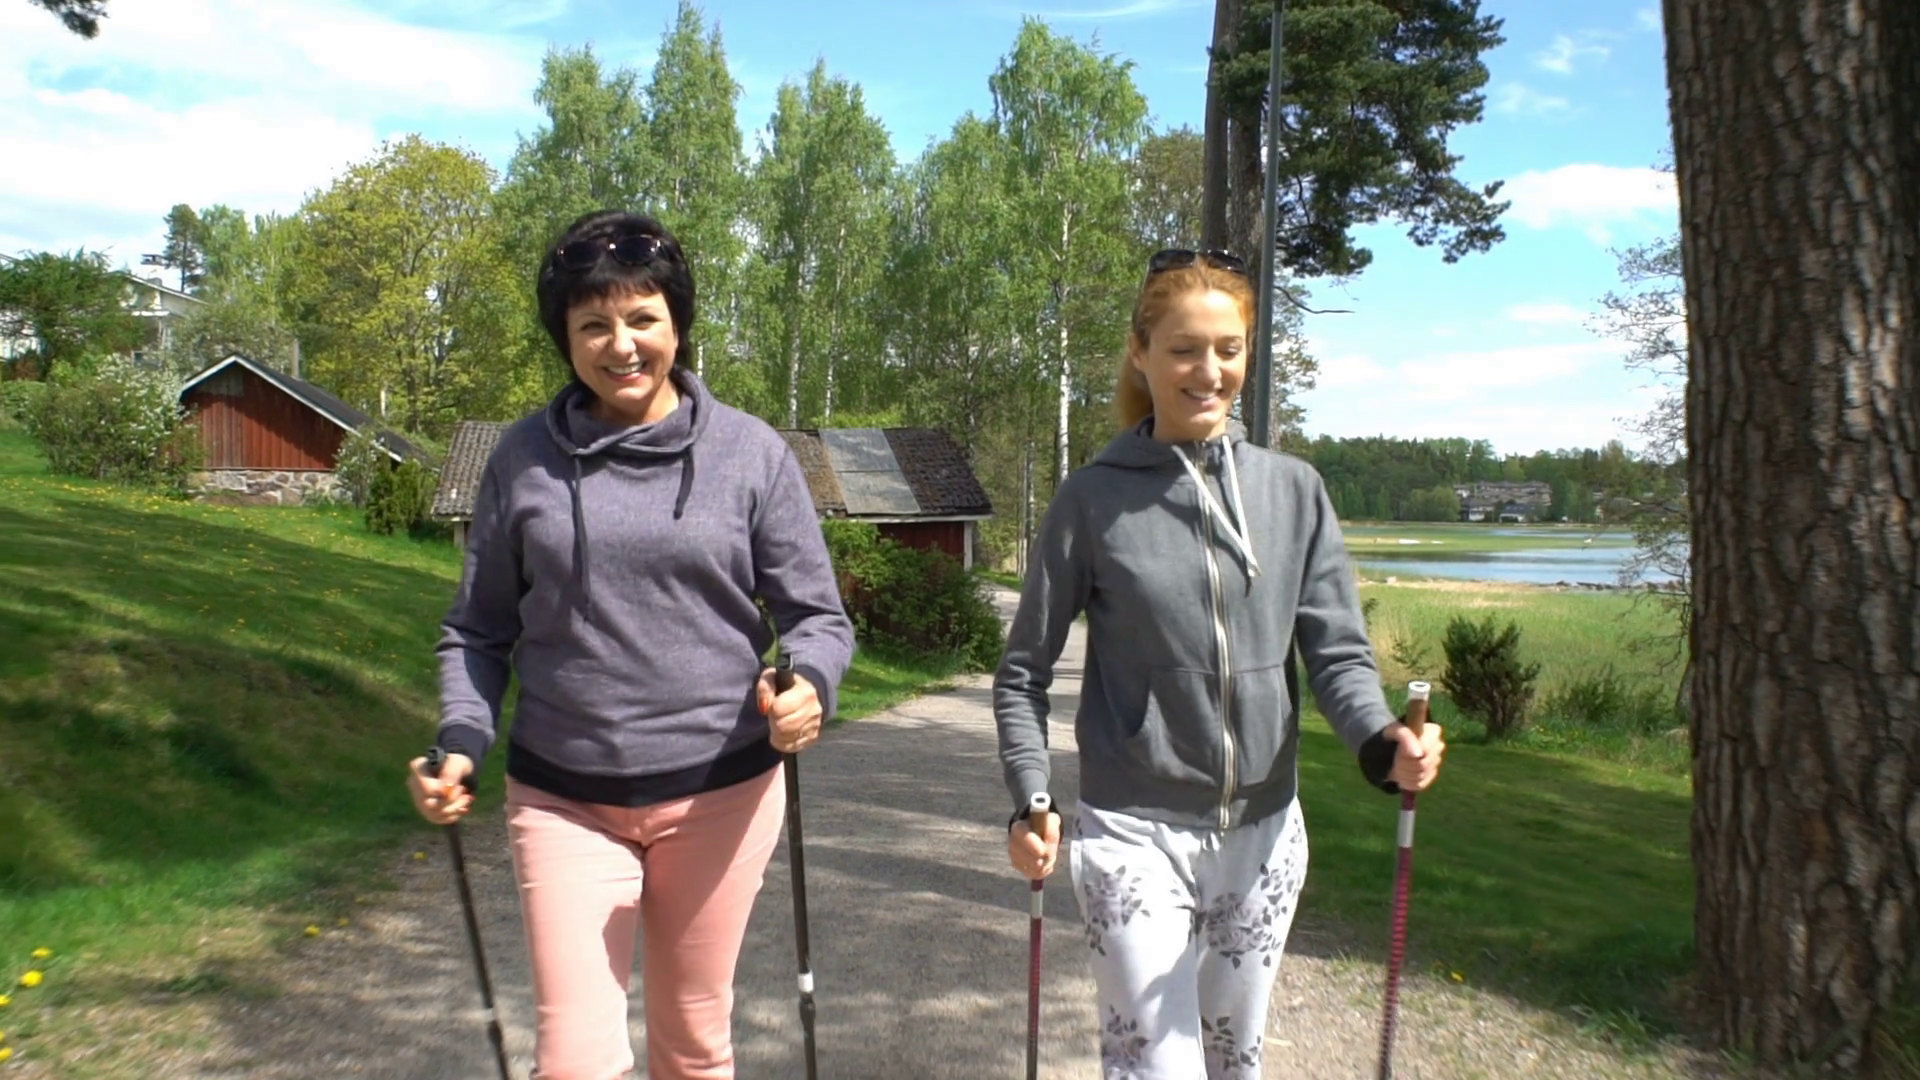 Nordic walking outdoor activity for all ages. Two active women ...